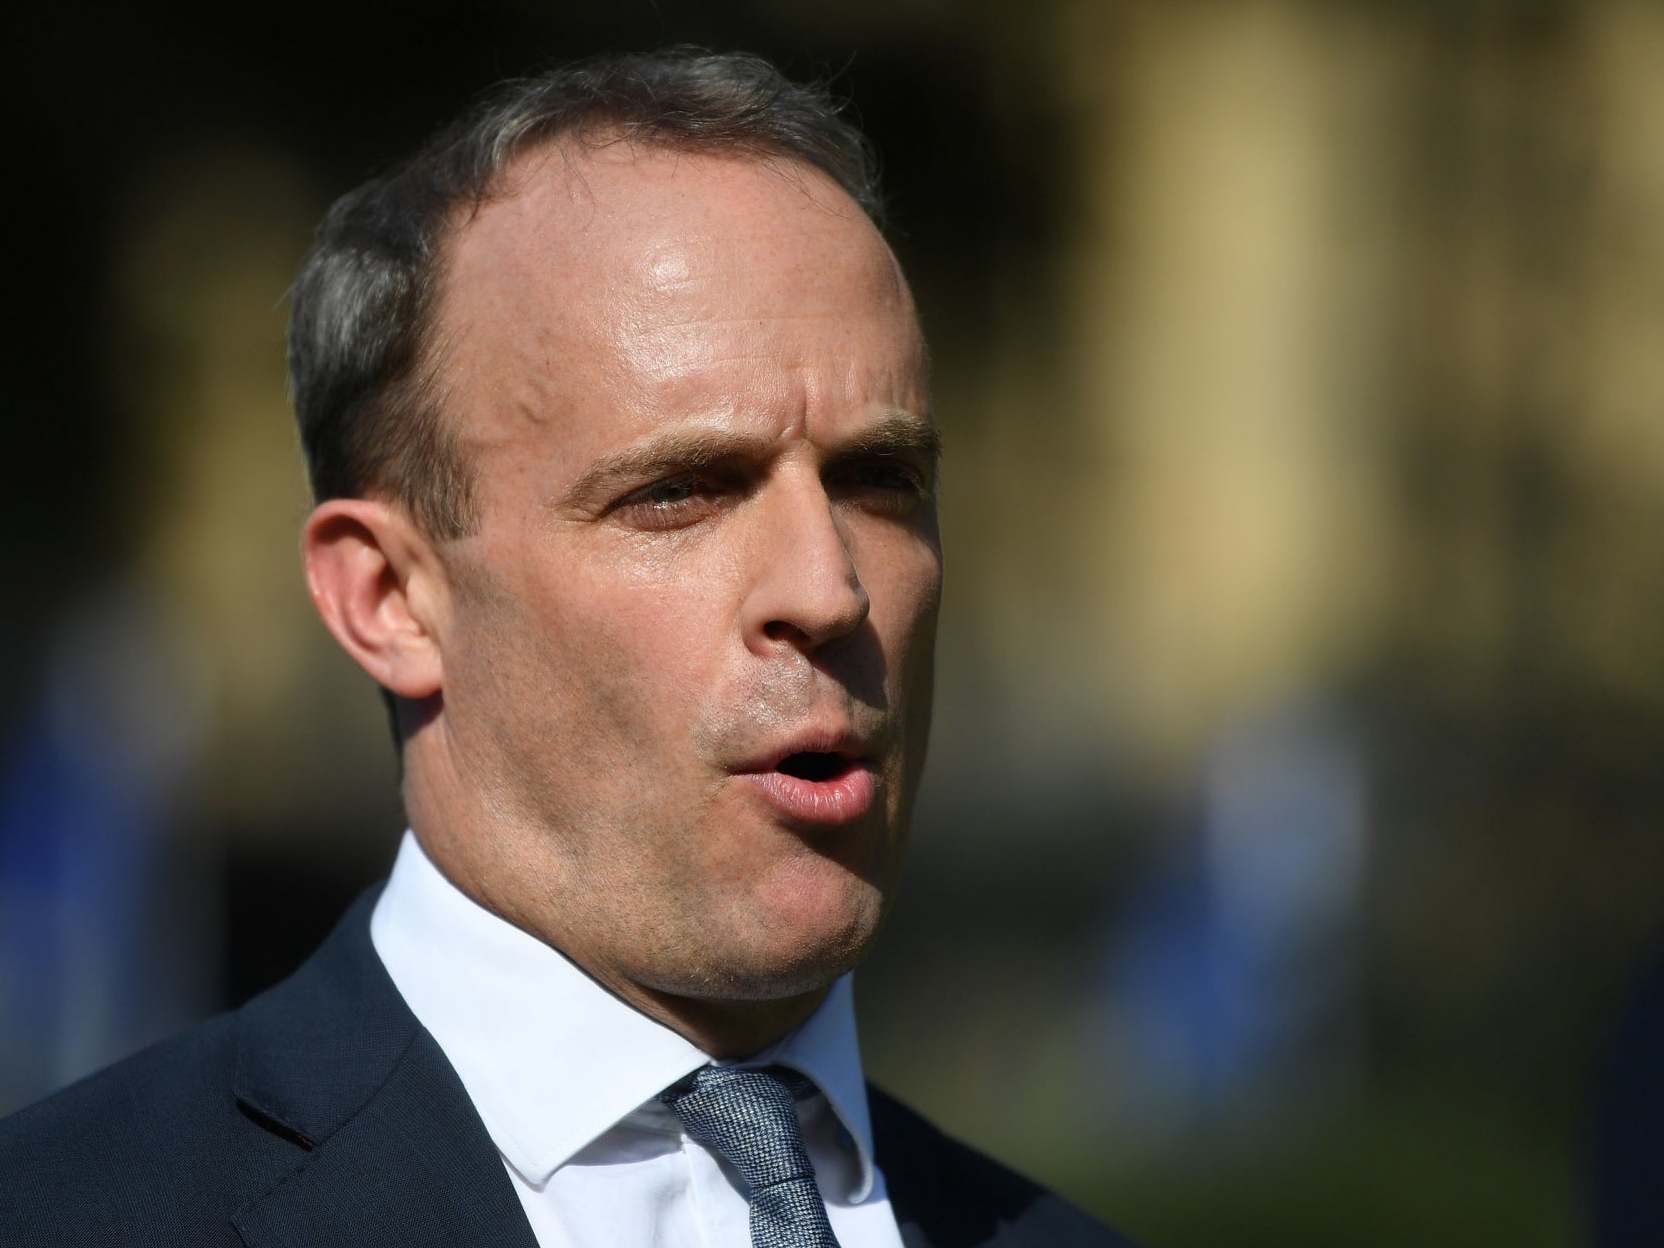 Foreign secretary Dominic Raab is the designated acting leader of the country if Boris Johnson is incapacitated